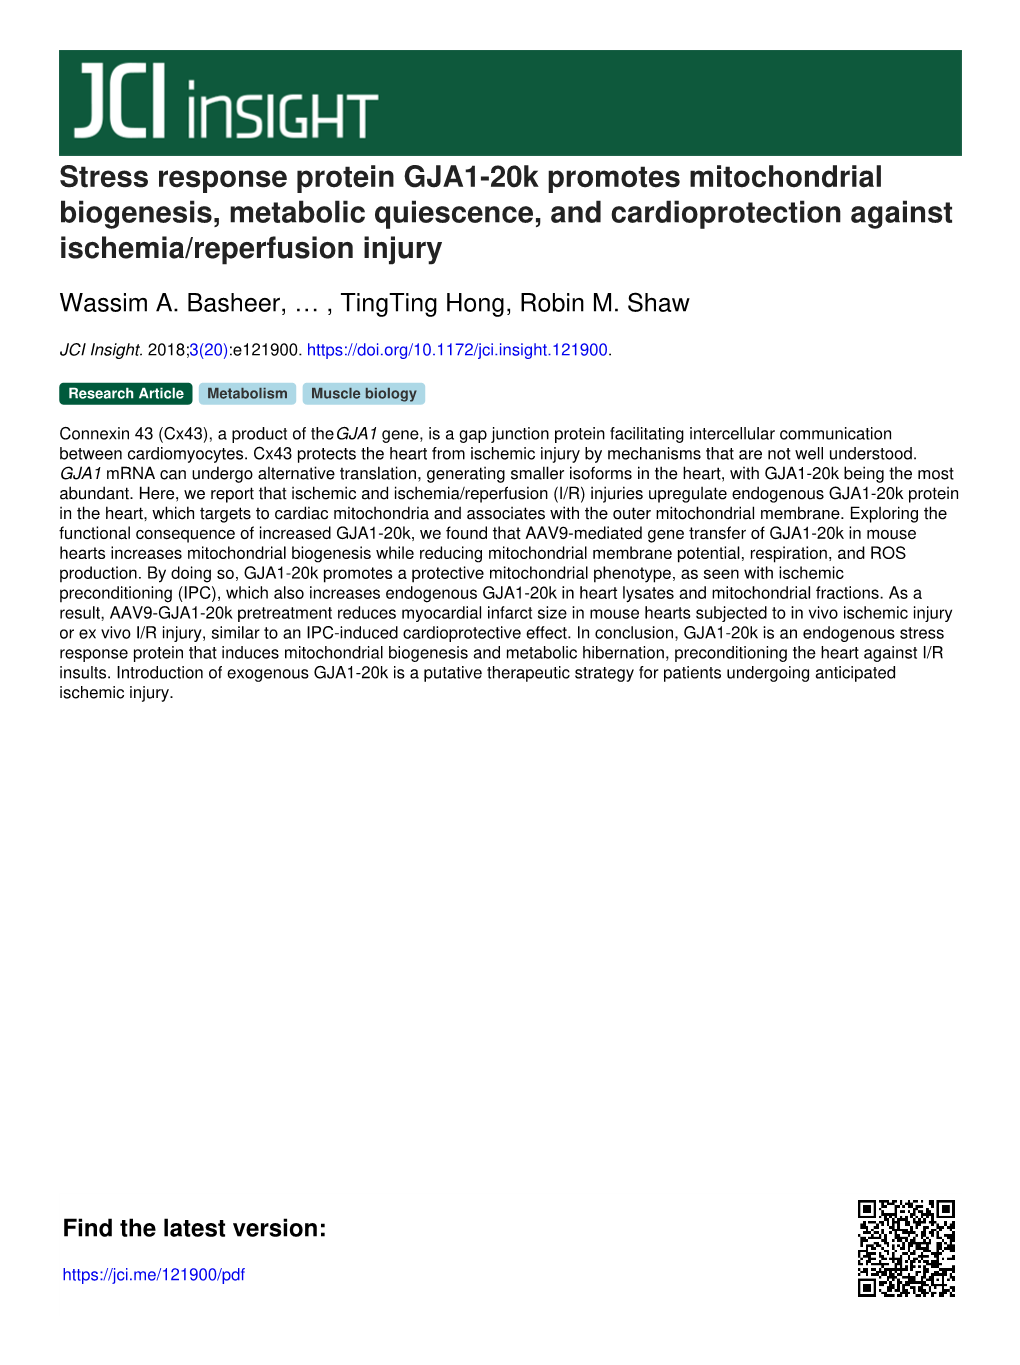 Stress Response Protein GJA1-20K Promotes Mitochondrial Biogenesis, Metabolic Quiescence, and Cardioprotection Against Ischemia/Reperfusion Injury